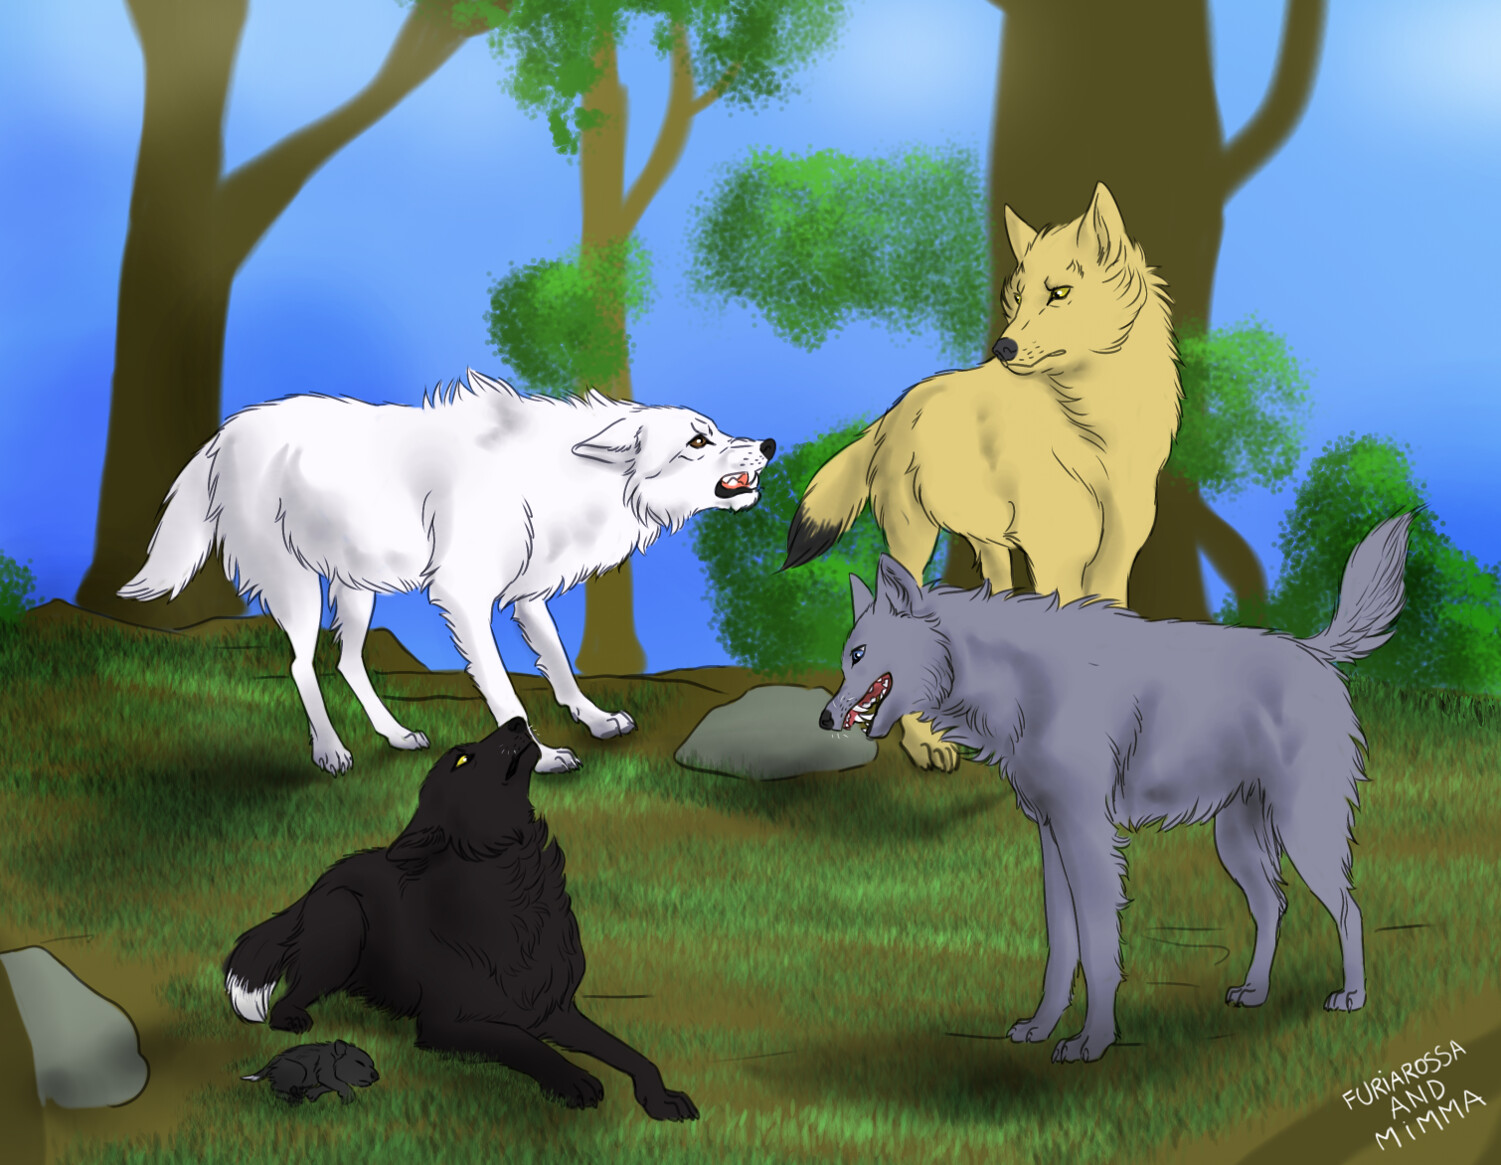 Aaand the story of Alex starts here... yes, he's the small puppy in the grass. And his parents, that are defending him against the alpha and the beta, are just omega wolves...